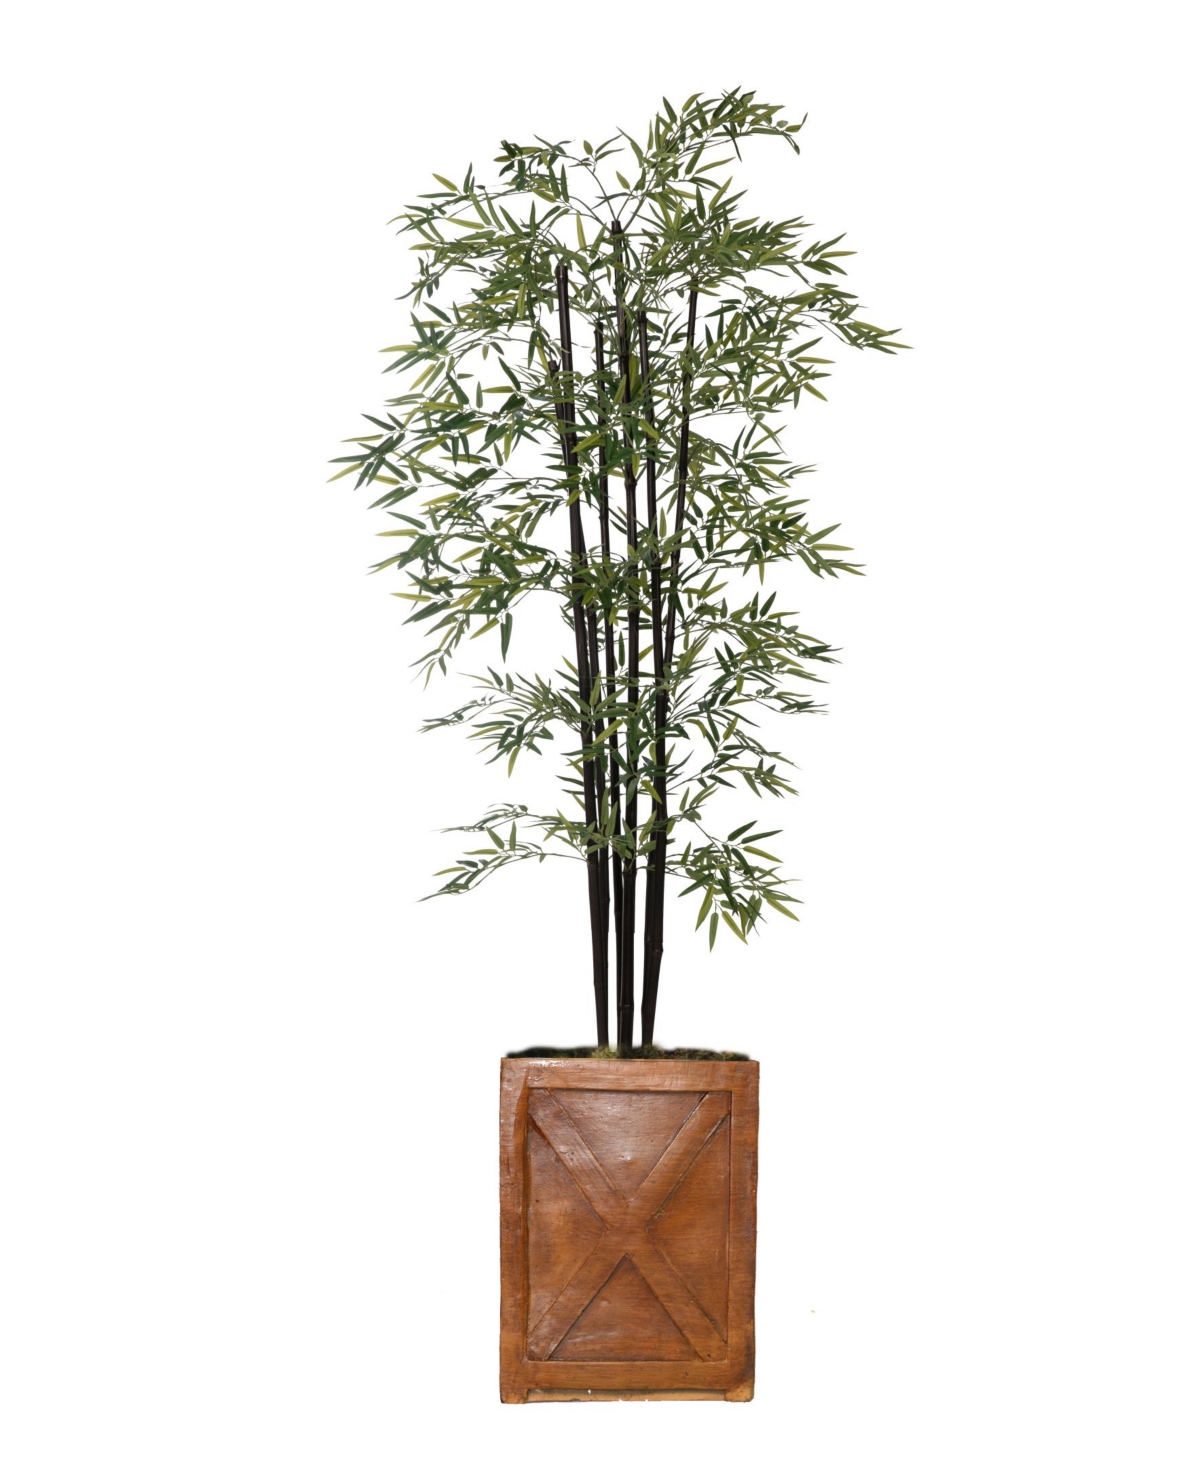 81" Tall Bamboo Tree With Decorative Black Poles and Fiberstone Planter - Green